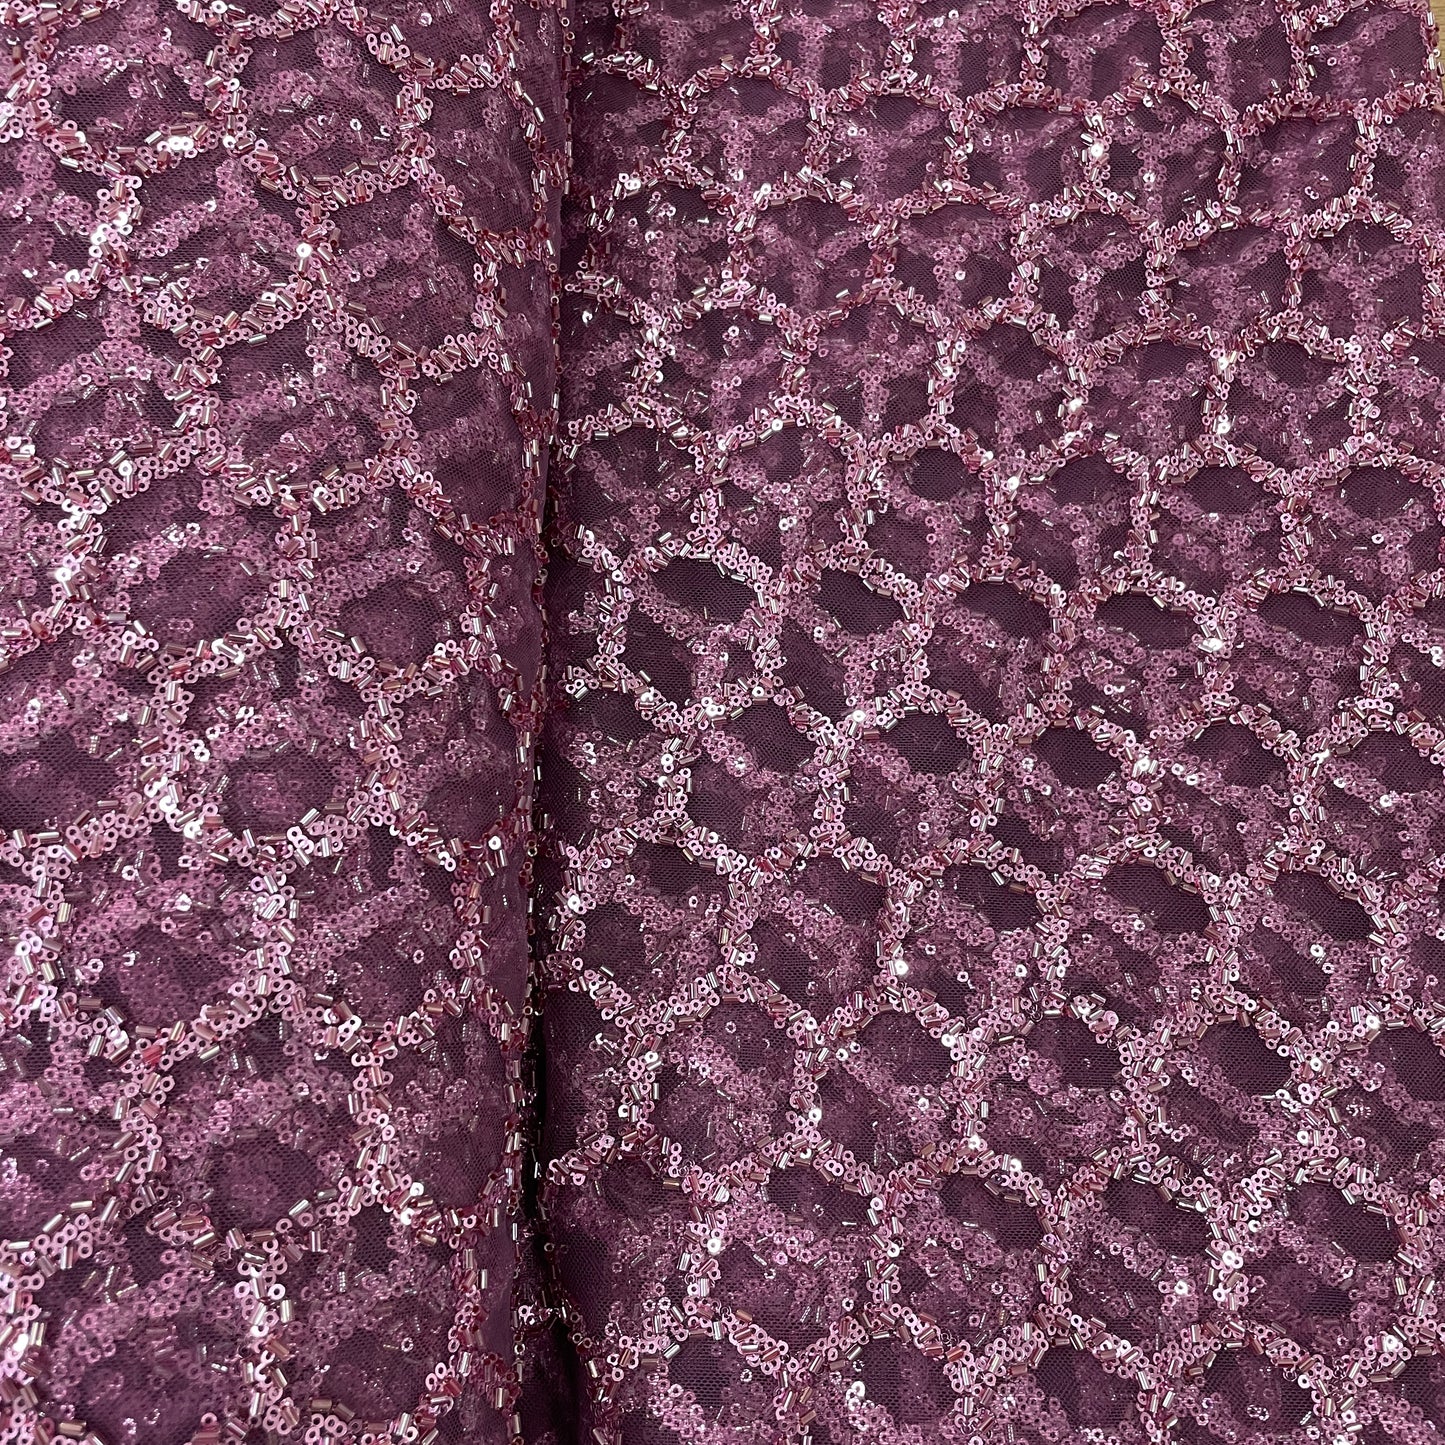 exclusive purple imported beads sequence embroidery net fabric